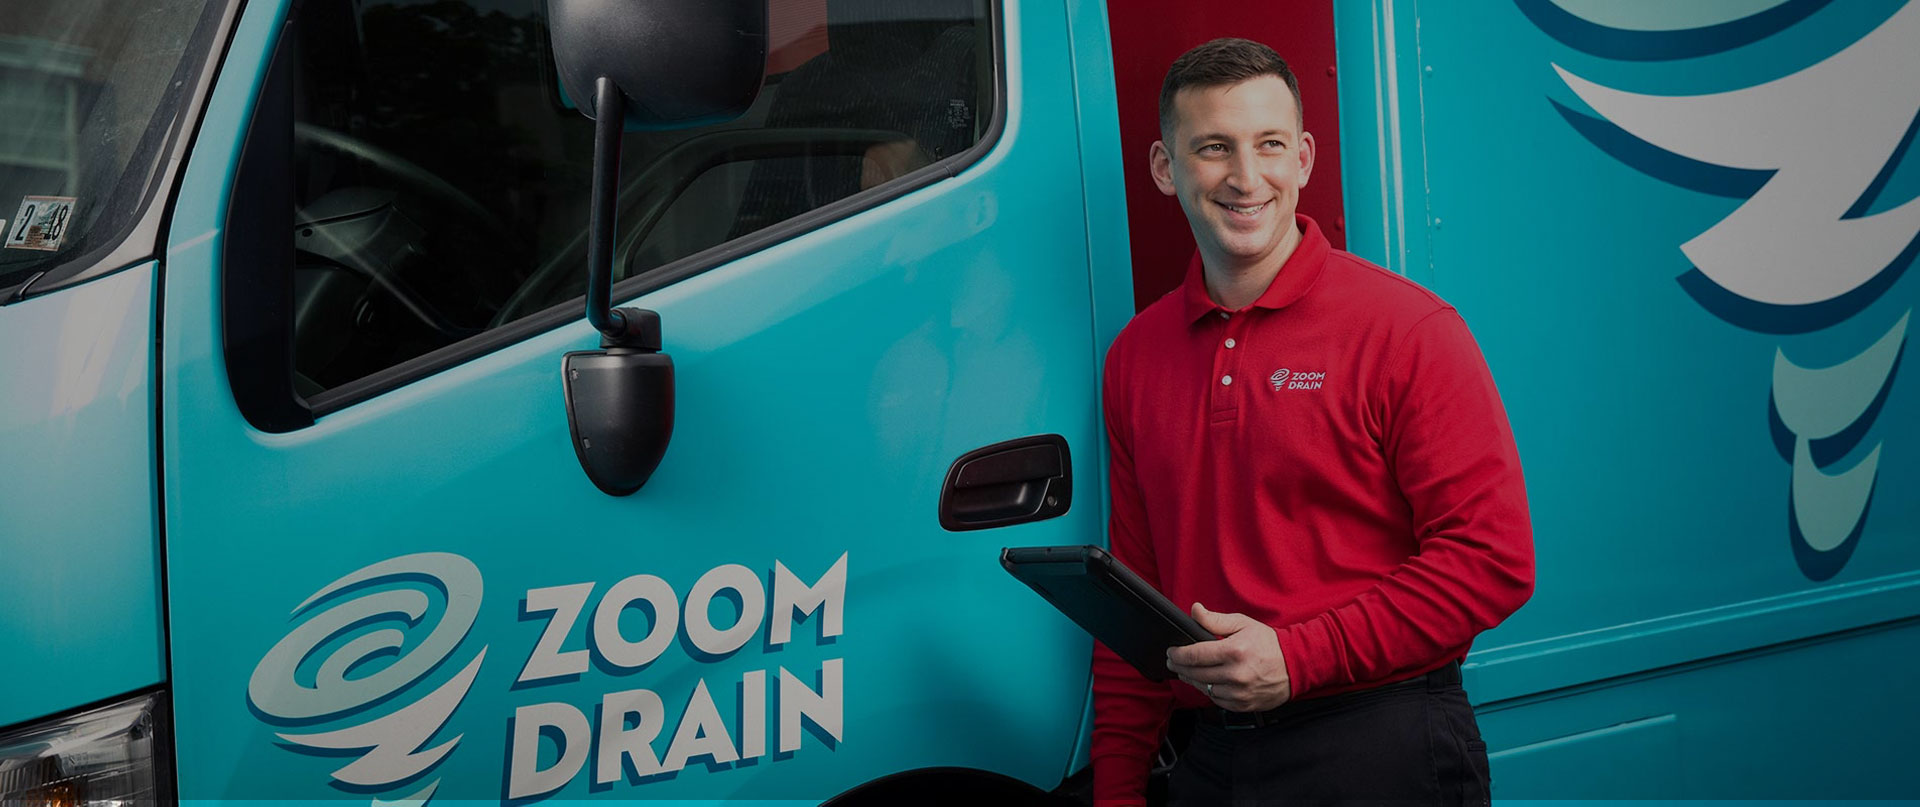 Man in a long-sleeved red ZOOM DRAIN shirt holding a tablet leans against a red and blue ZOOM DRAIN truck.